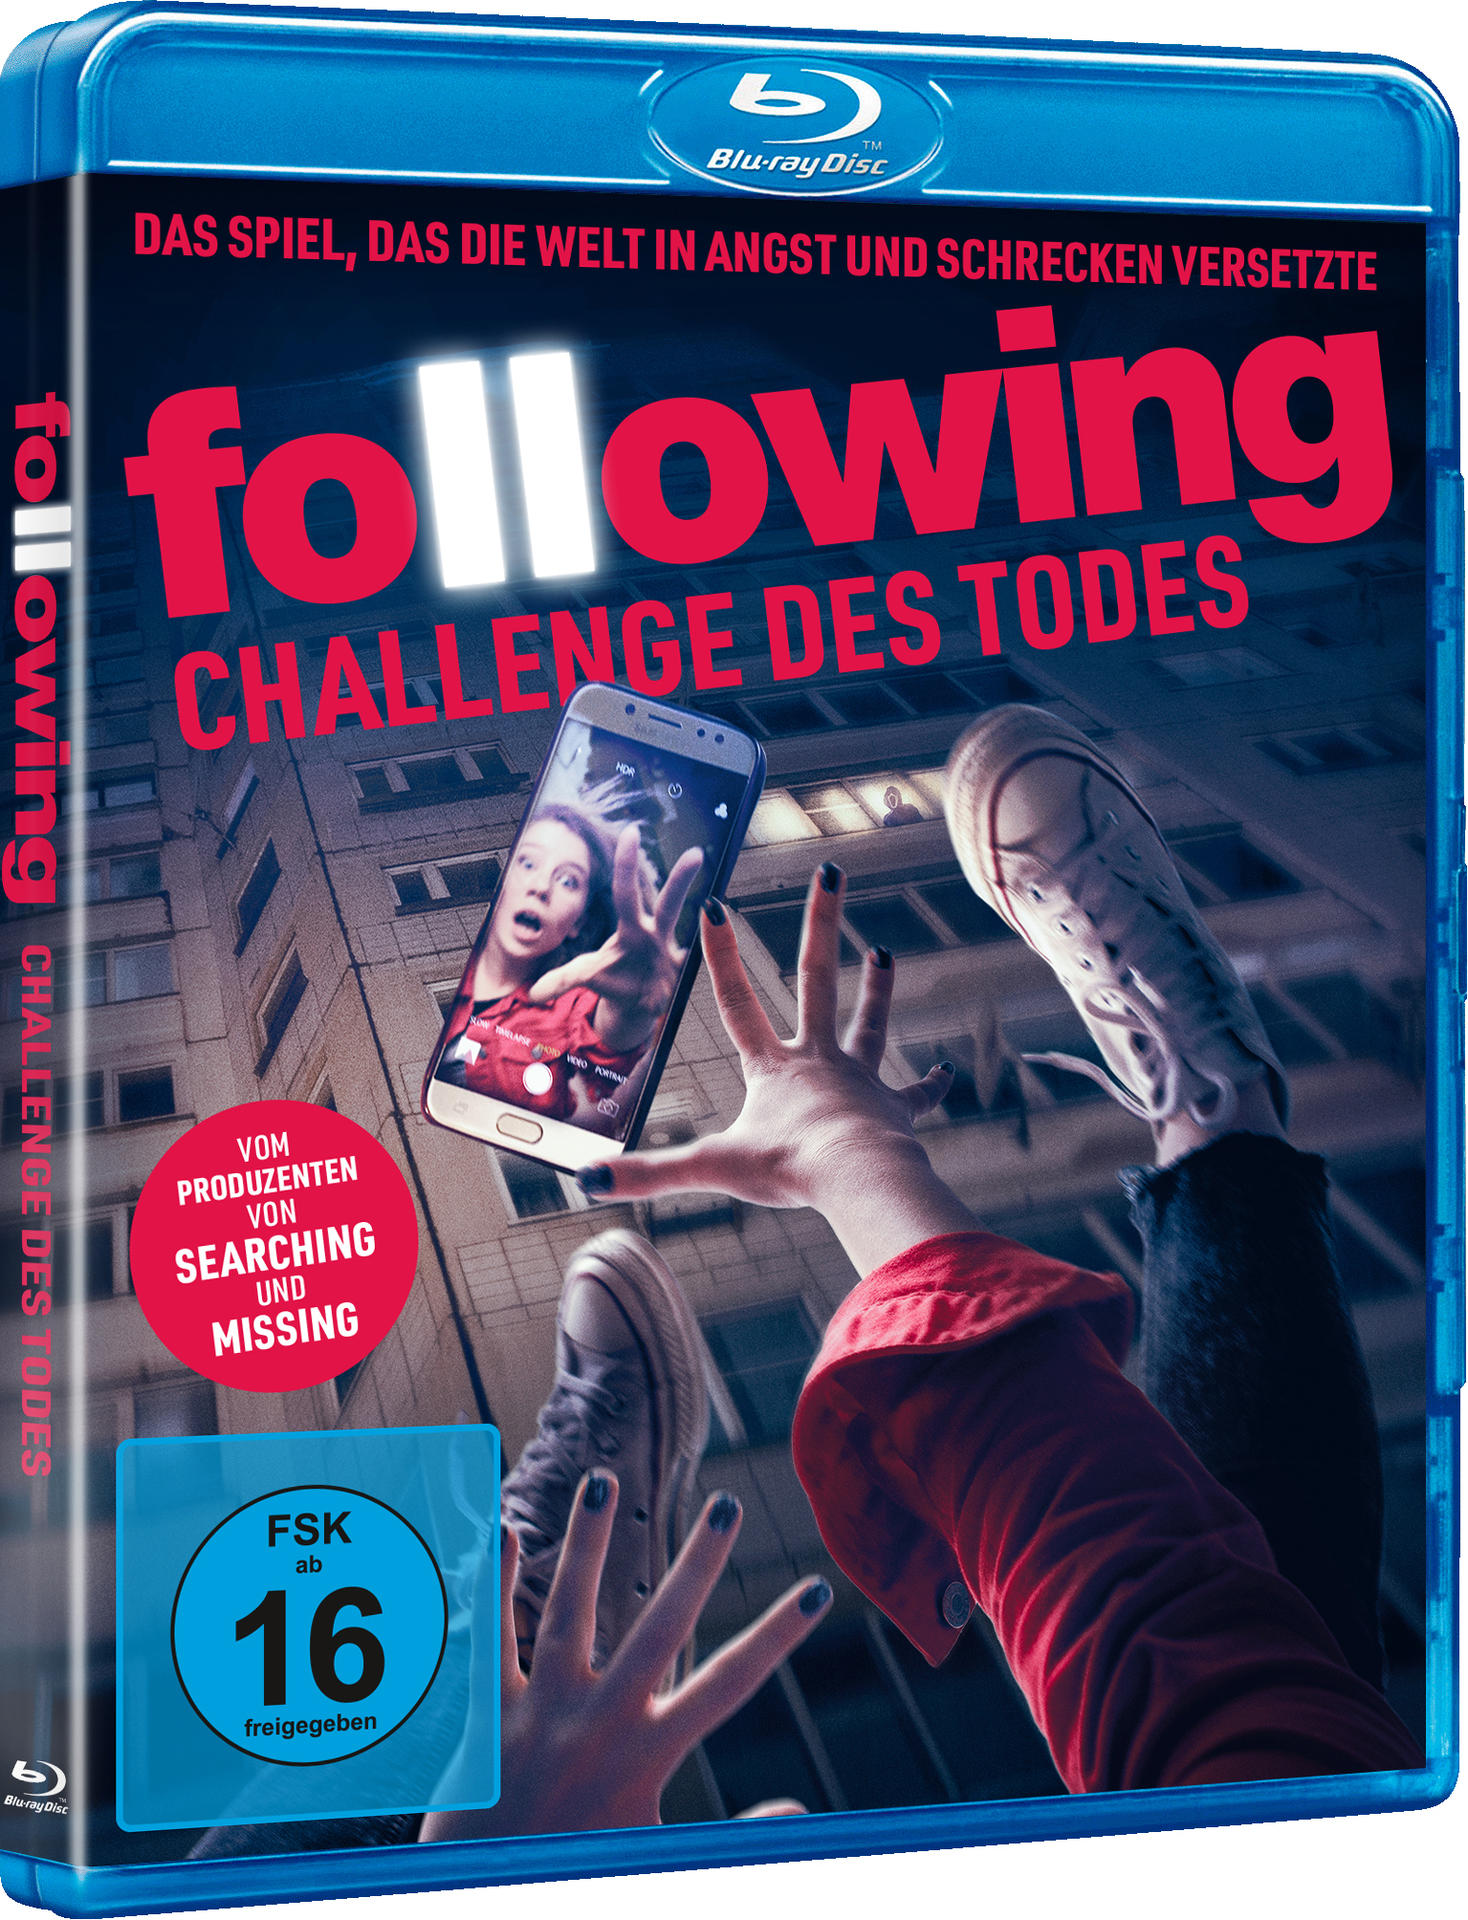 Todes - des Blu-ray Challenge following